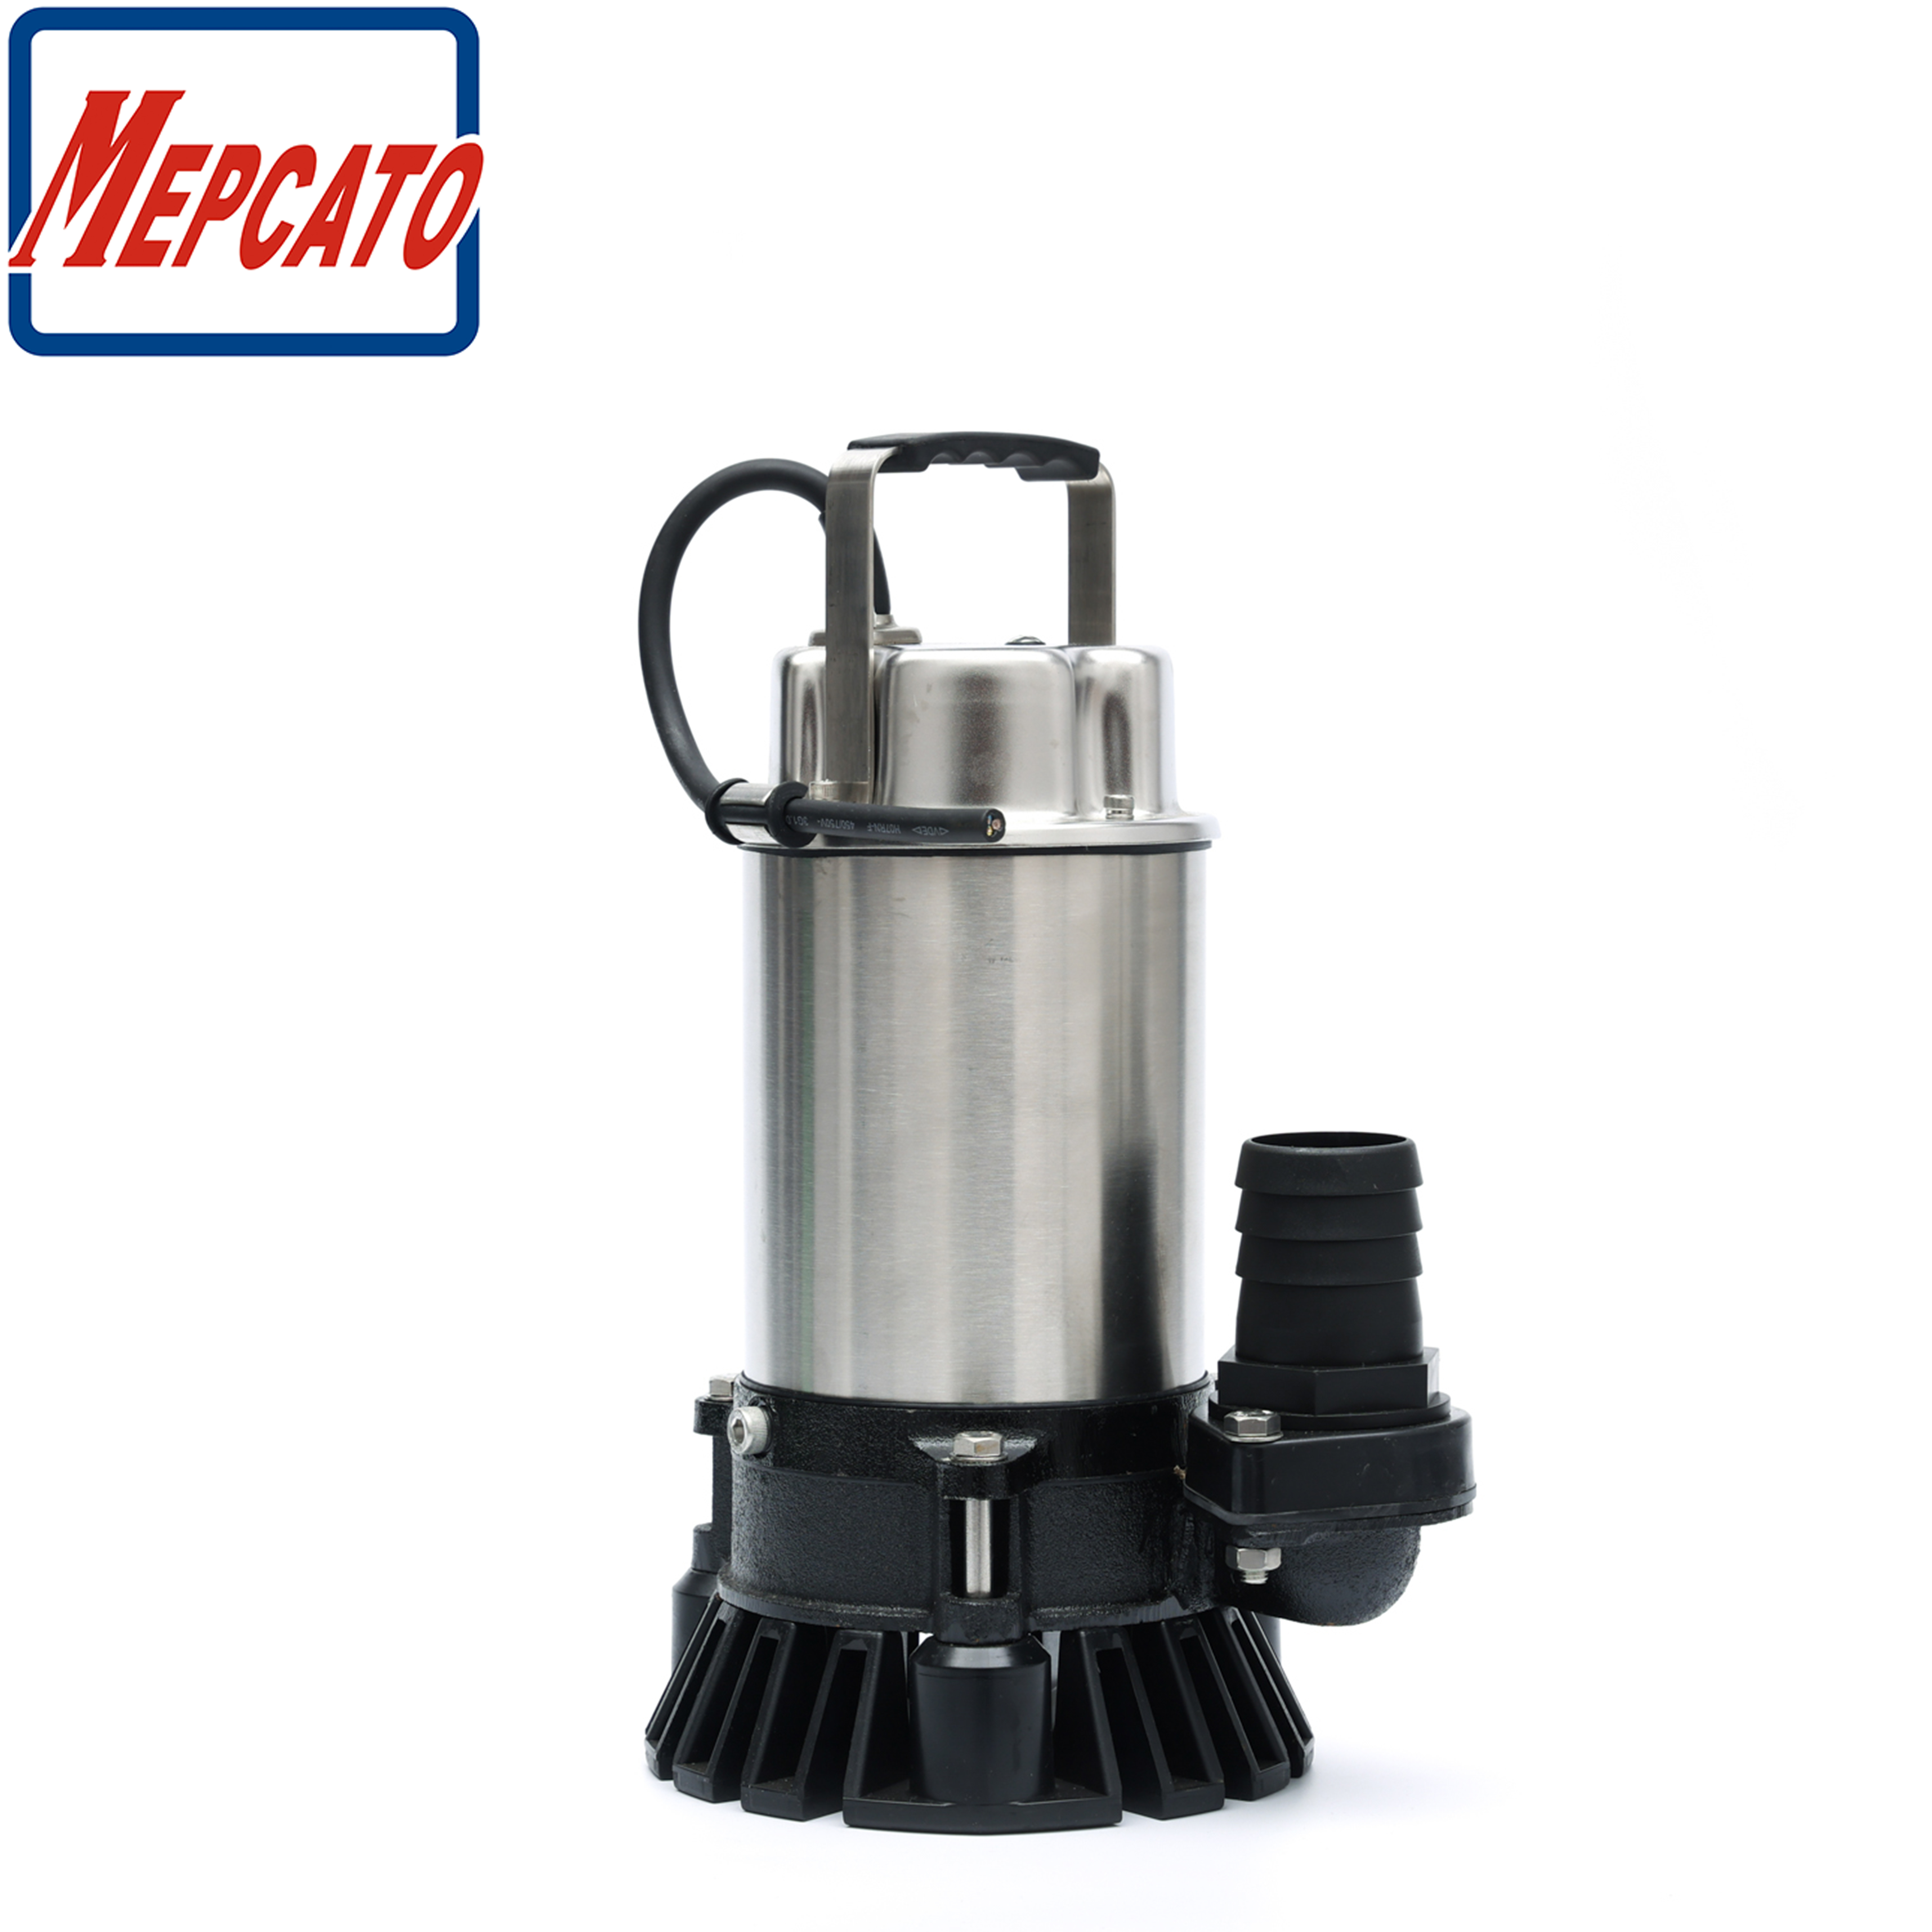 1HP Industrial Electric Vortex Sewage Submersible Wastewater Drainage Pump with Stirring Device for Construction Sites